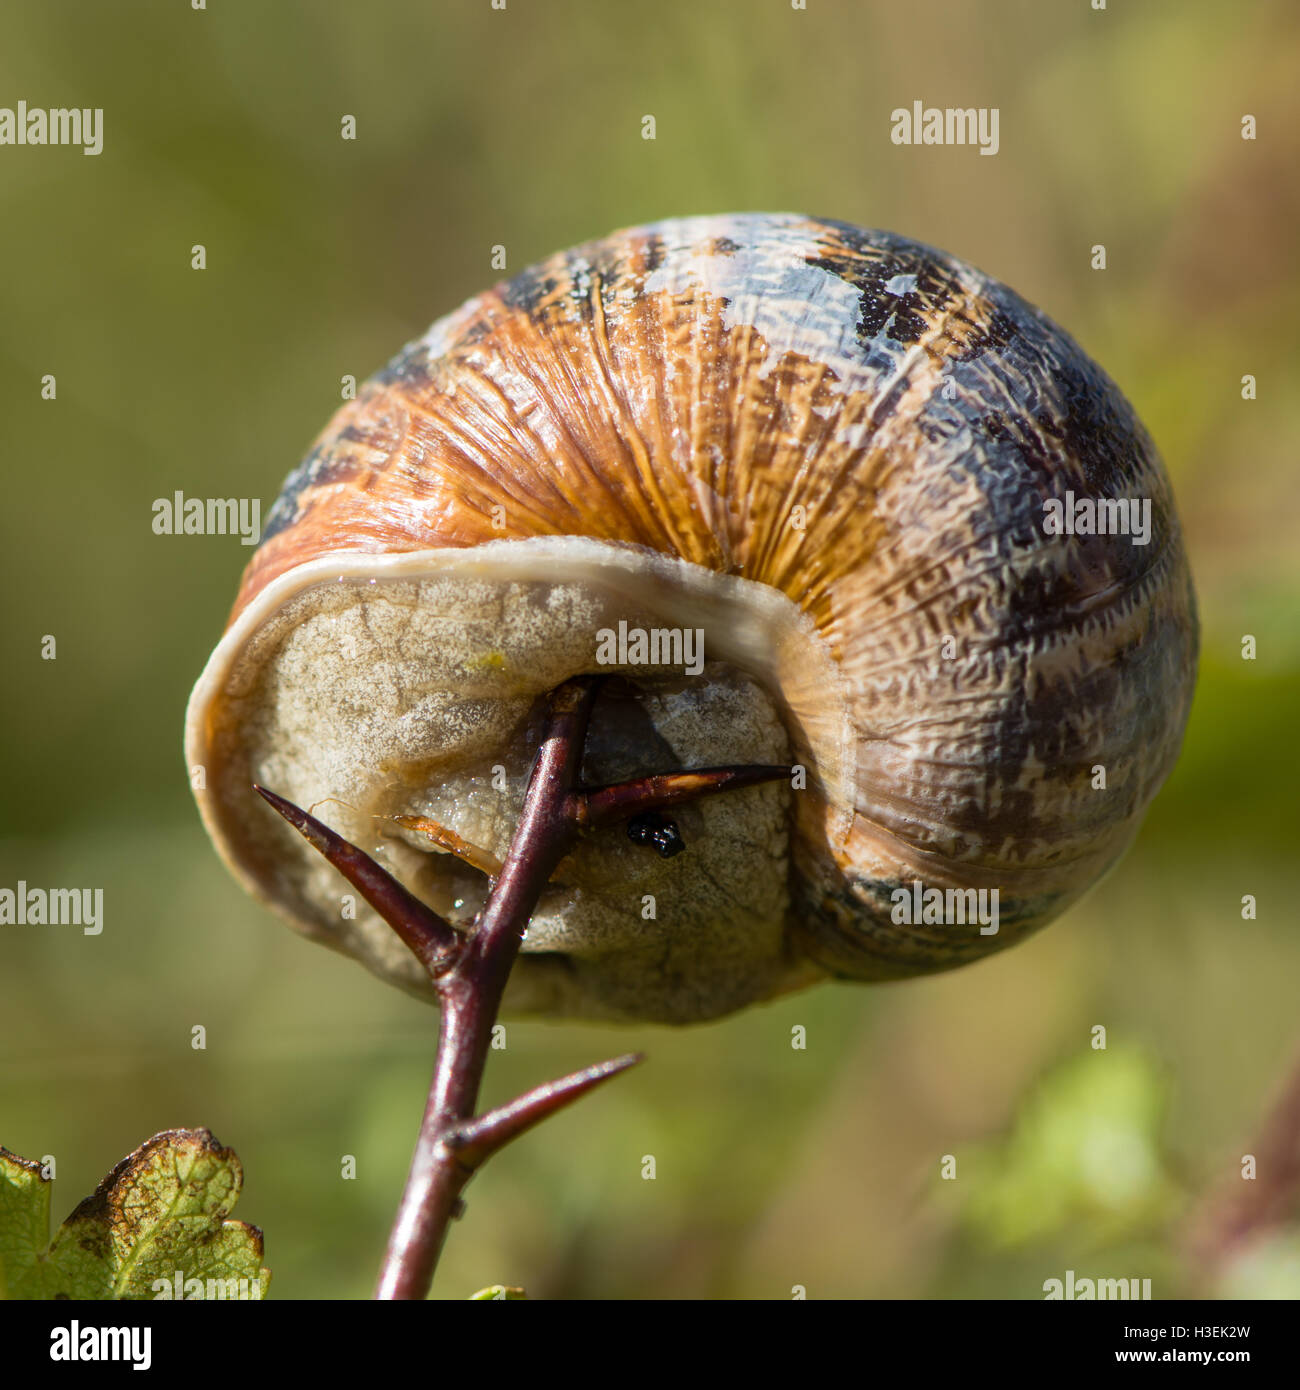 Garden snail (Cornu aspersum) impaled on thorn. A mollusc in the family Helicidae unable to escape from sharp hawthorn spike Stock Photo